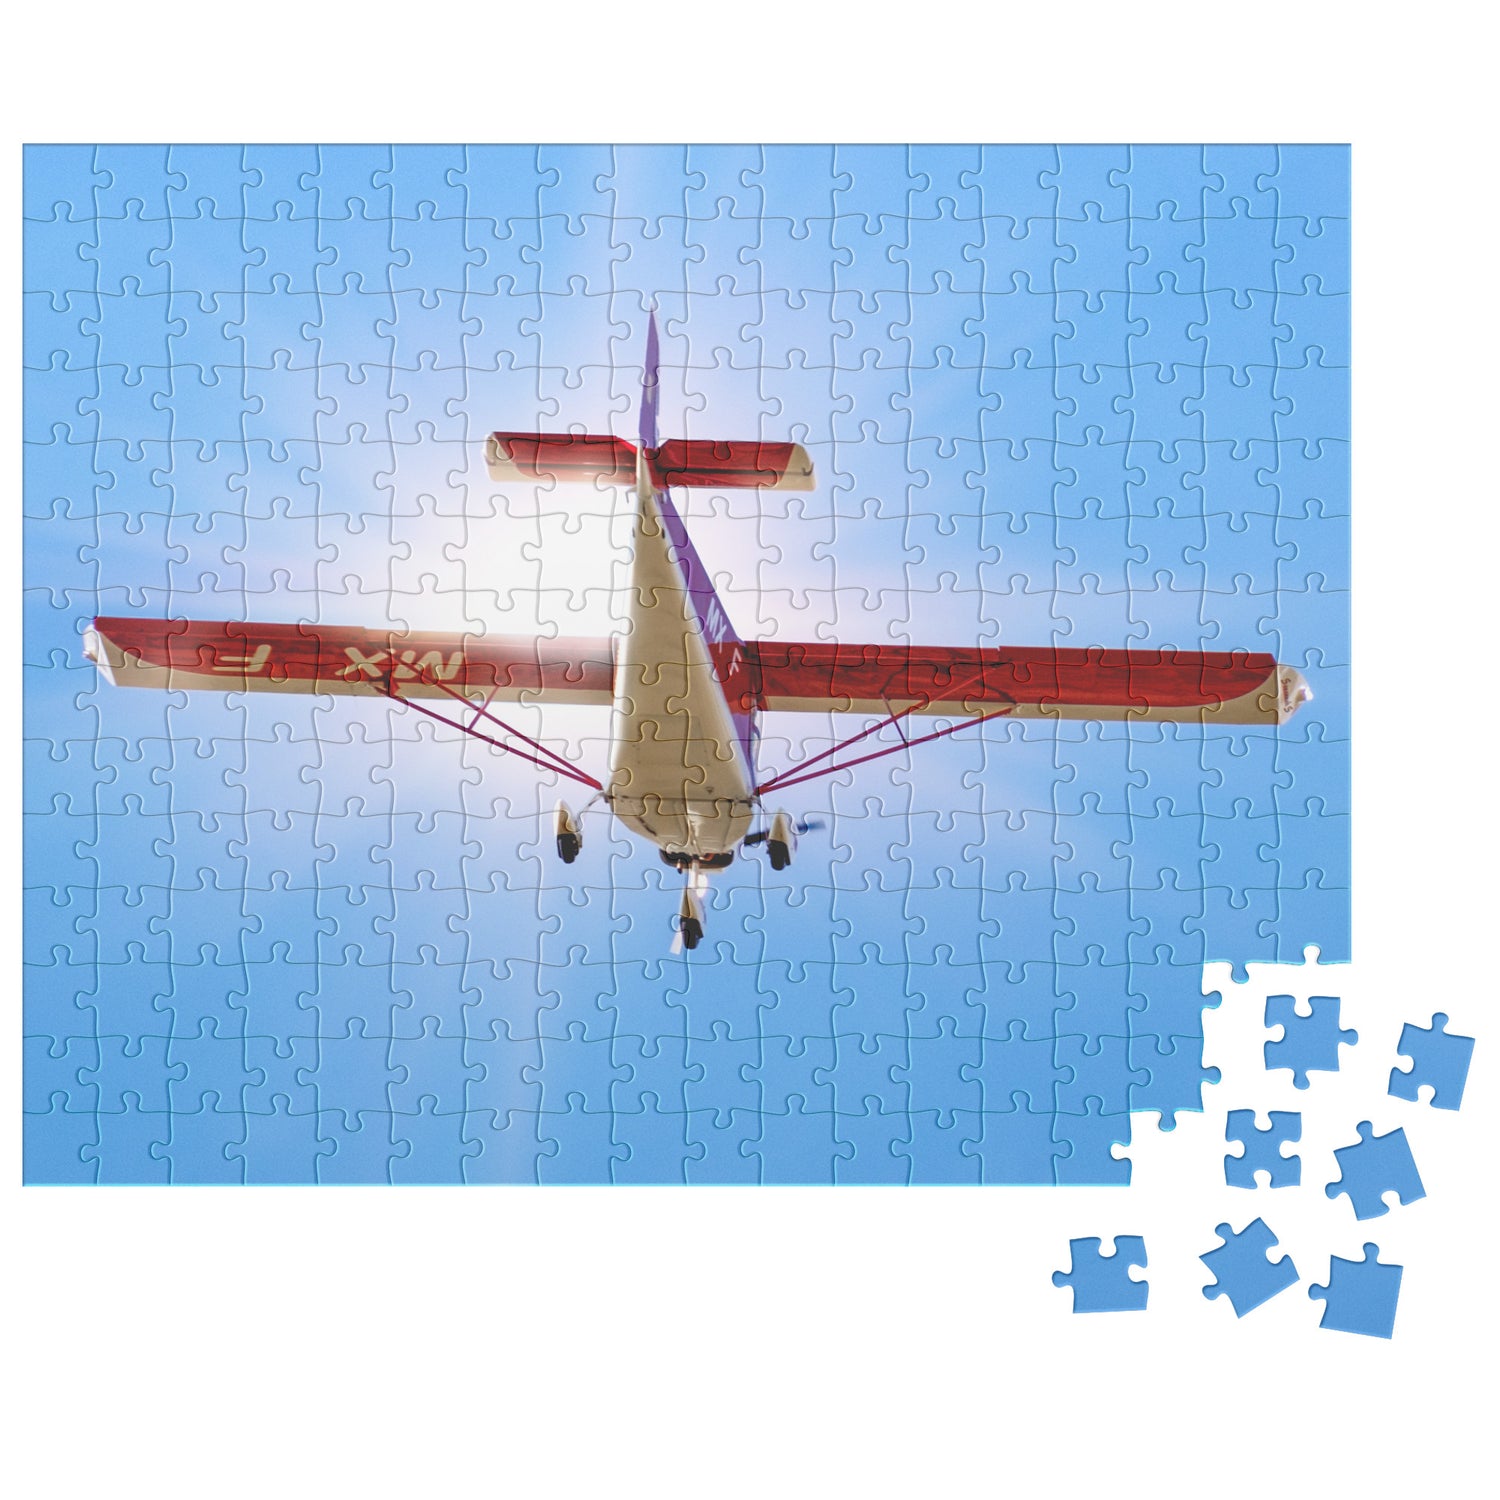 Aviation themed jigsaw puzzle (To the Sun)